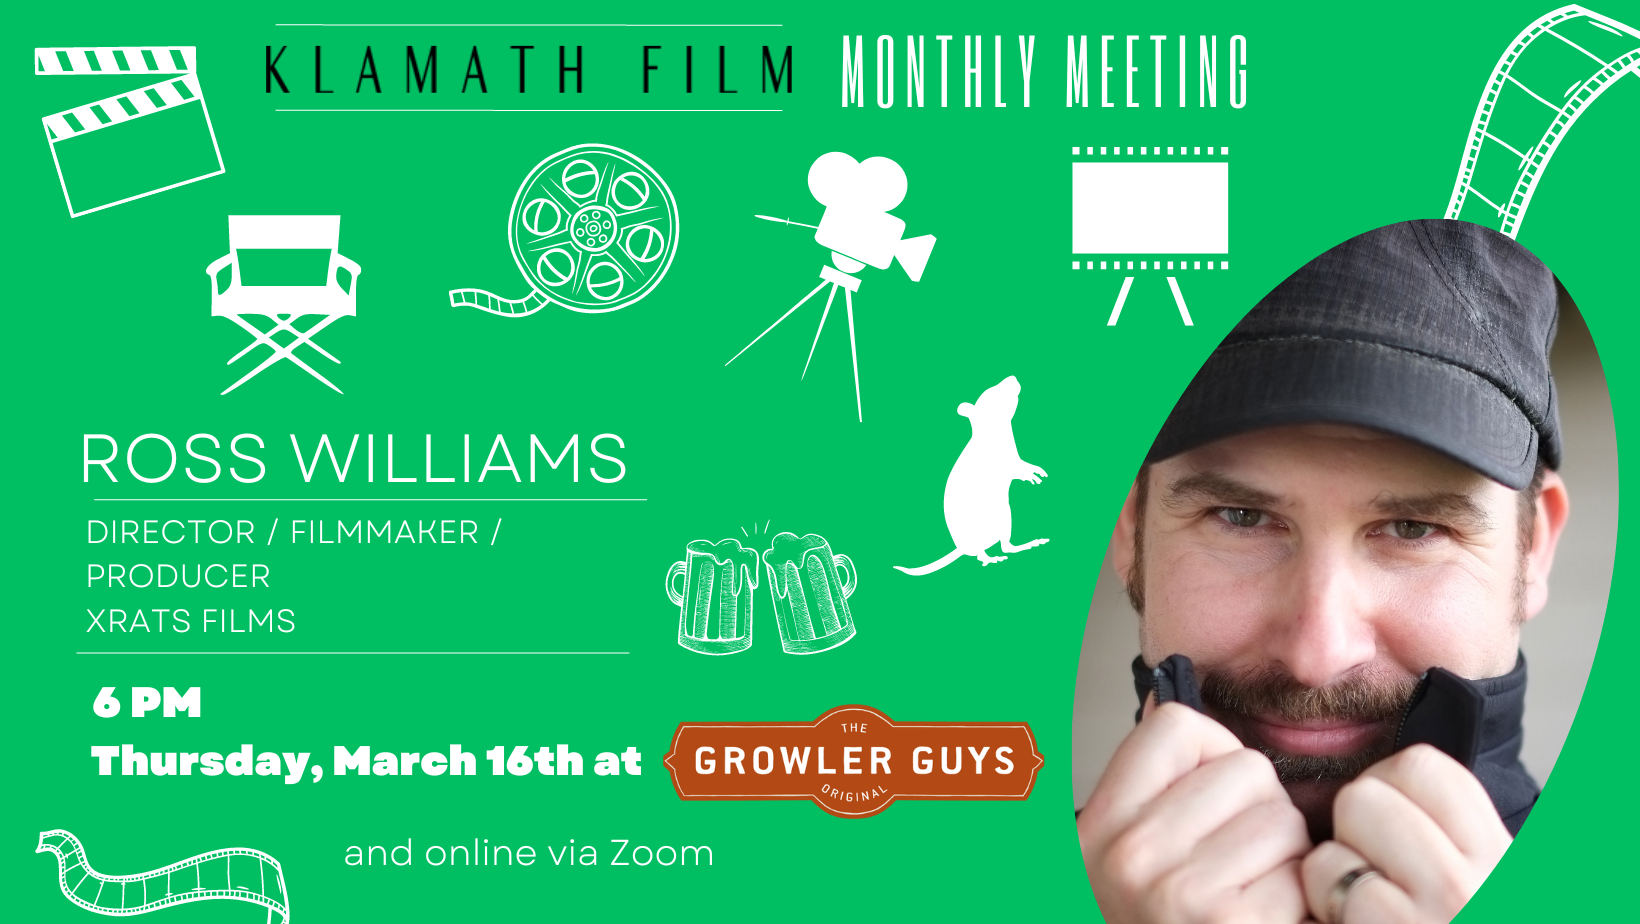 Image shows meeting date and time (march 16 at 6 pm at the growler guys and via zoom) for next member meeting with Ross Williams who is a director and producer